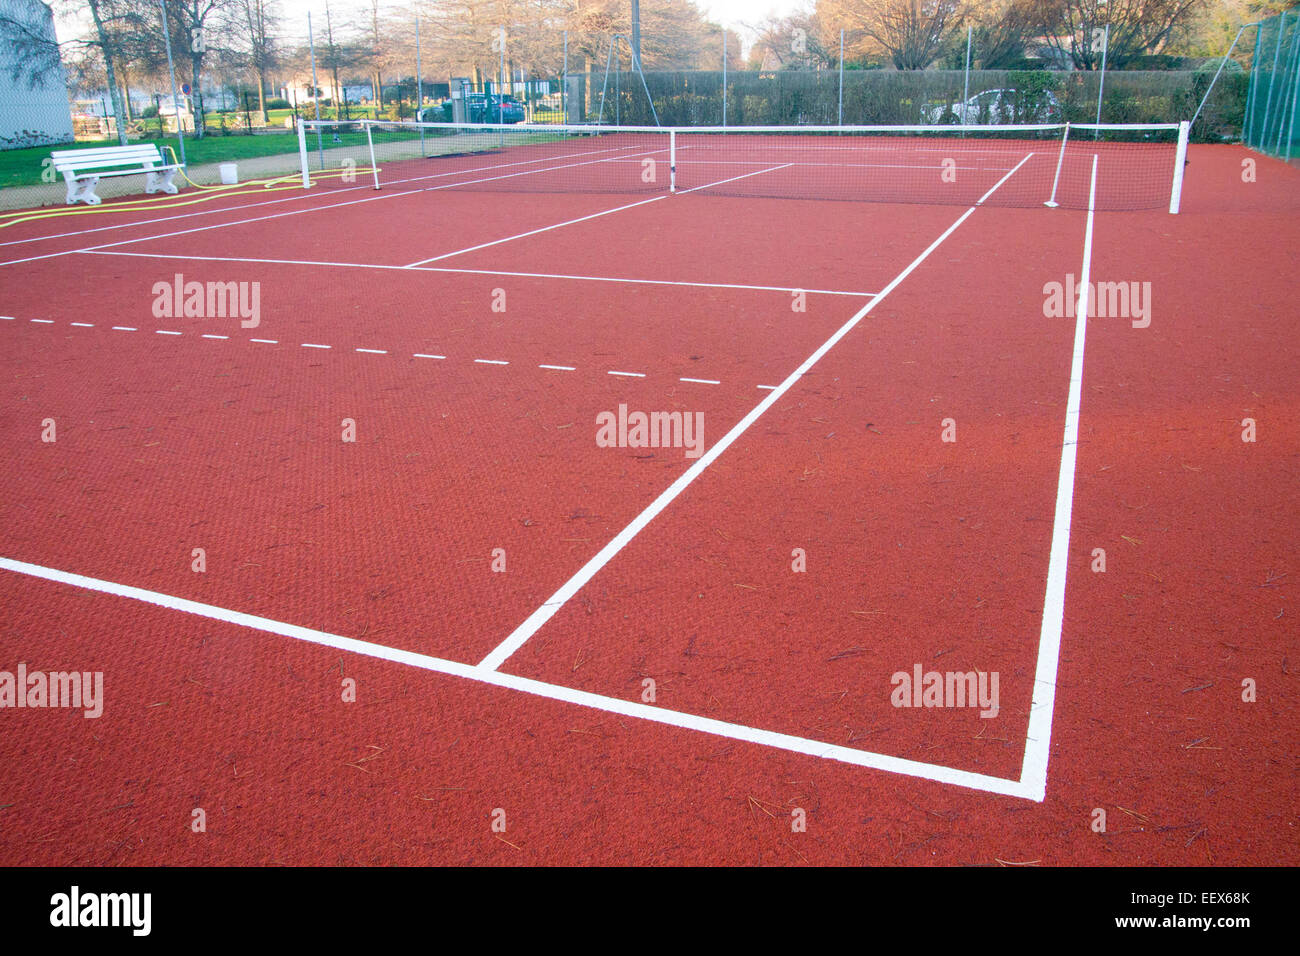 Tennis Artificial Clay Court Stock Photo - Alamy